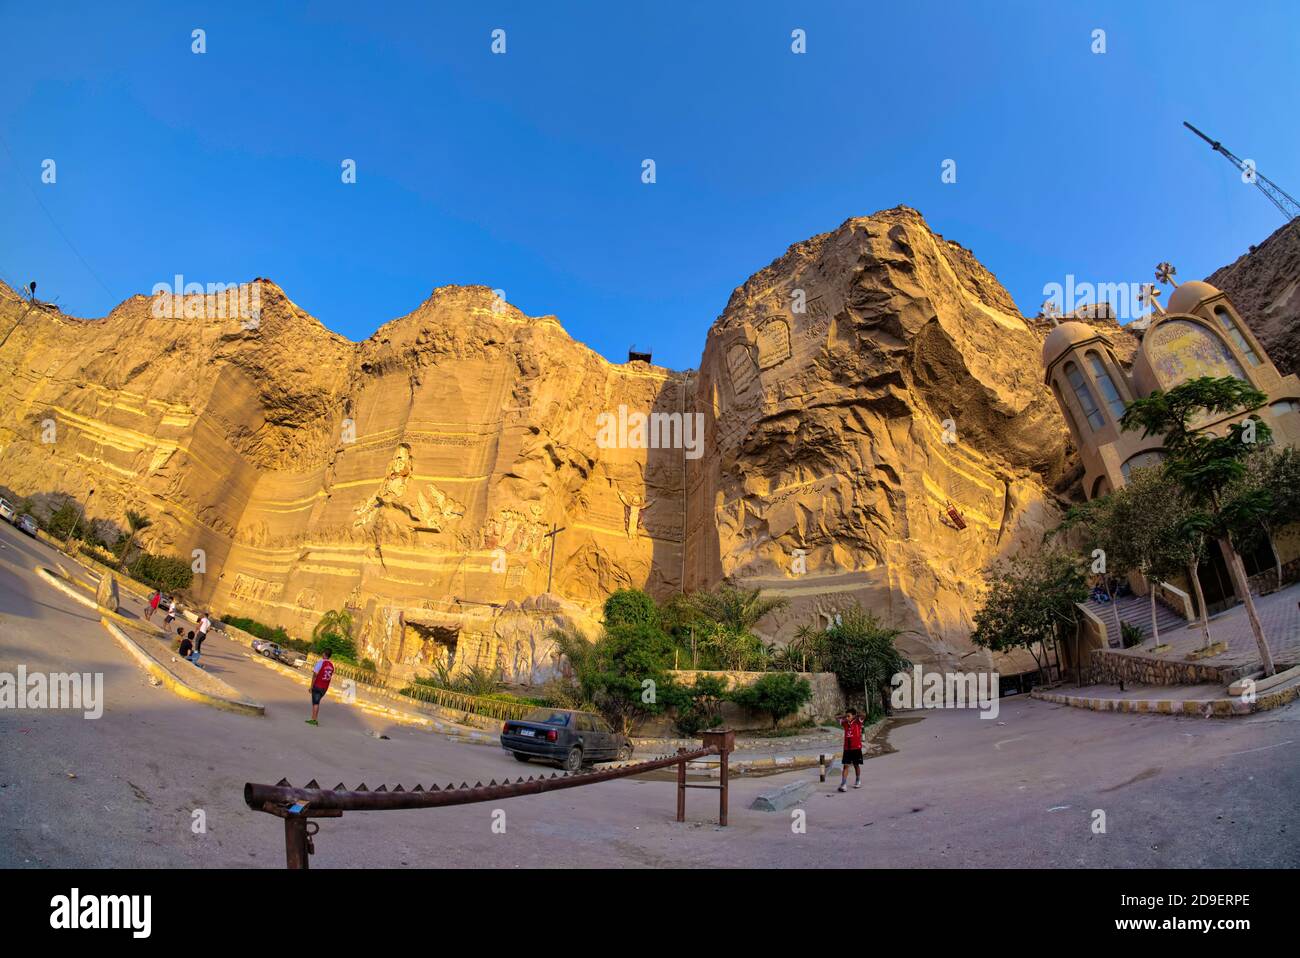 The Zabbaleen (meaning literally garbage people) village at the base of the Mokattam cliffs began around 1969 when the Cairo governor decided to move Stock Photo